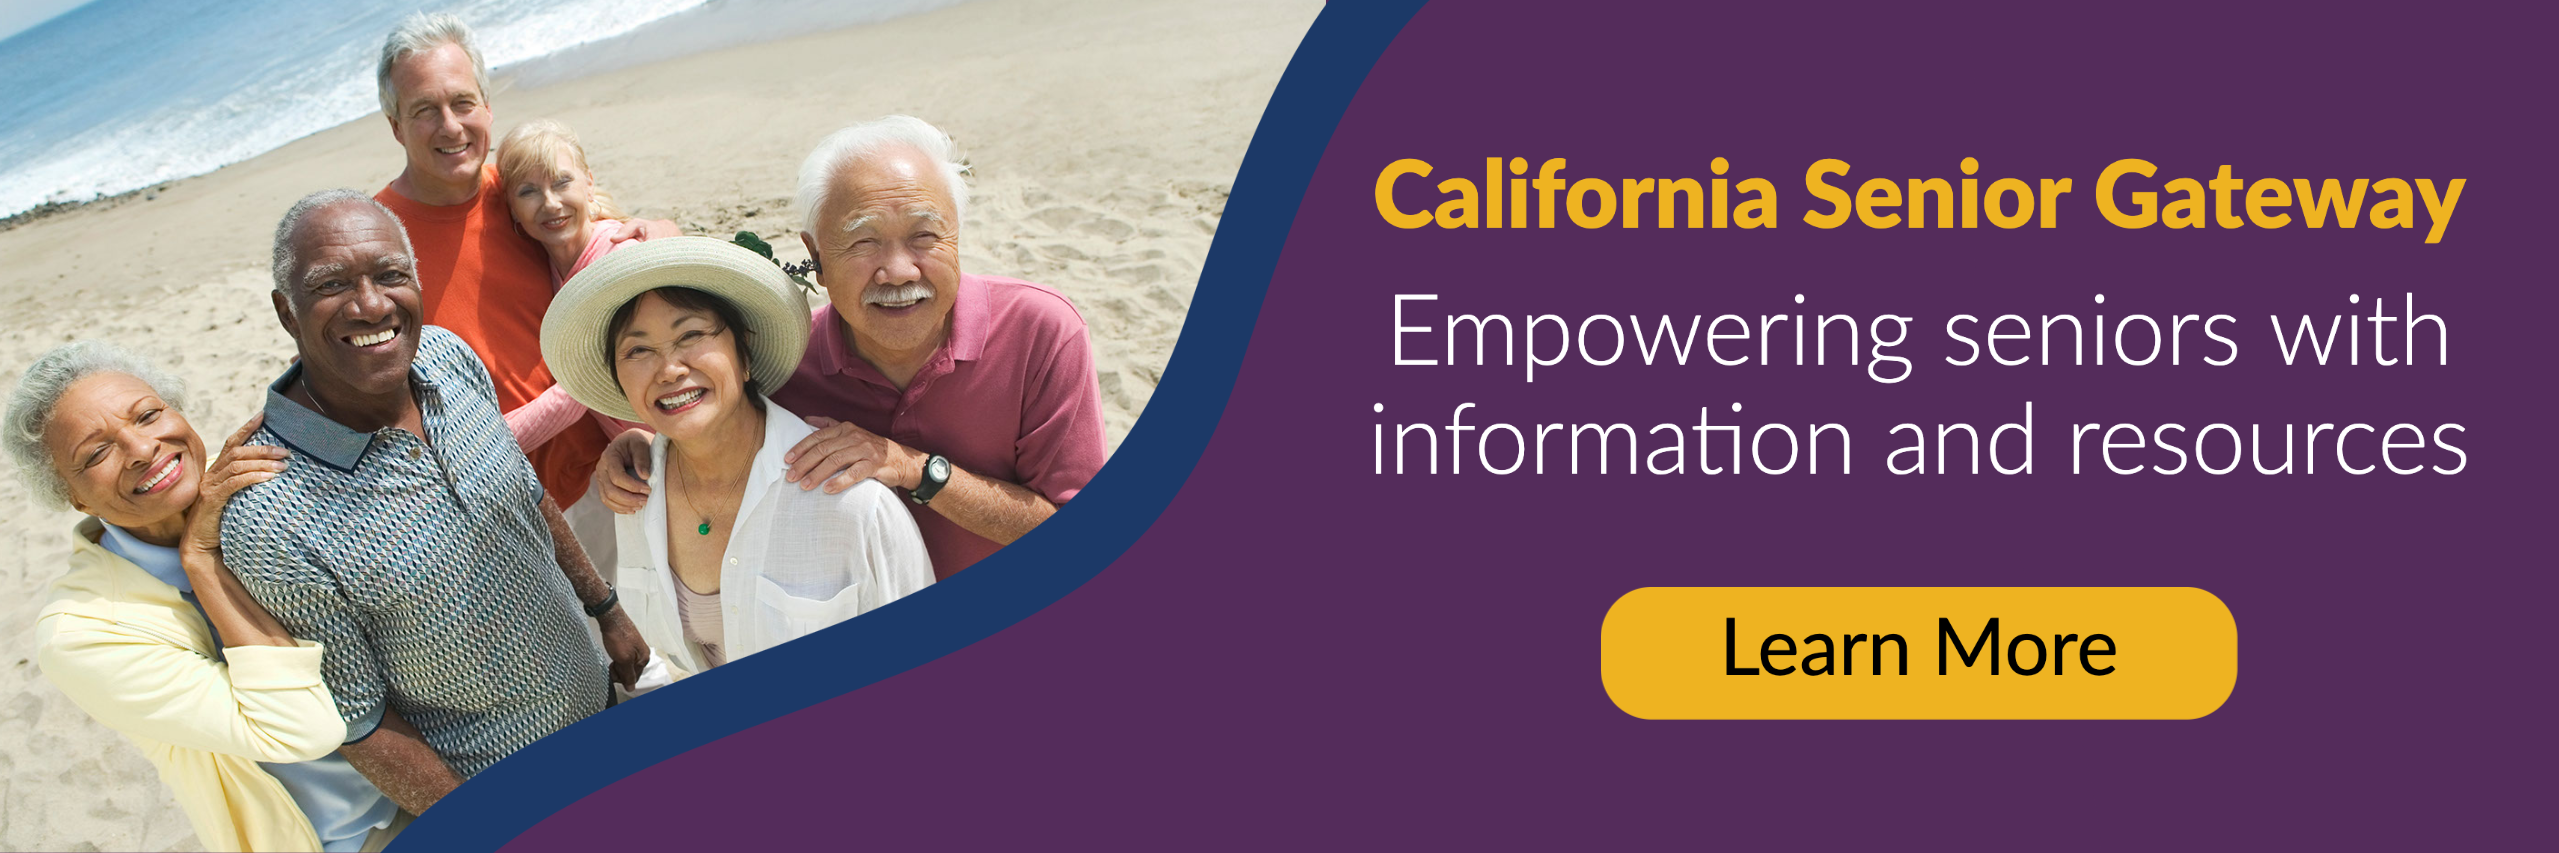 California Senior Gateway - Empowering seniors with information and resources. Click on the image to learn more and visit the Senior Gateway website.